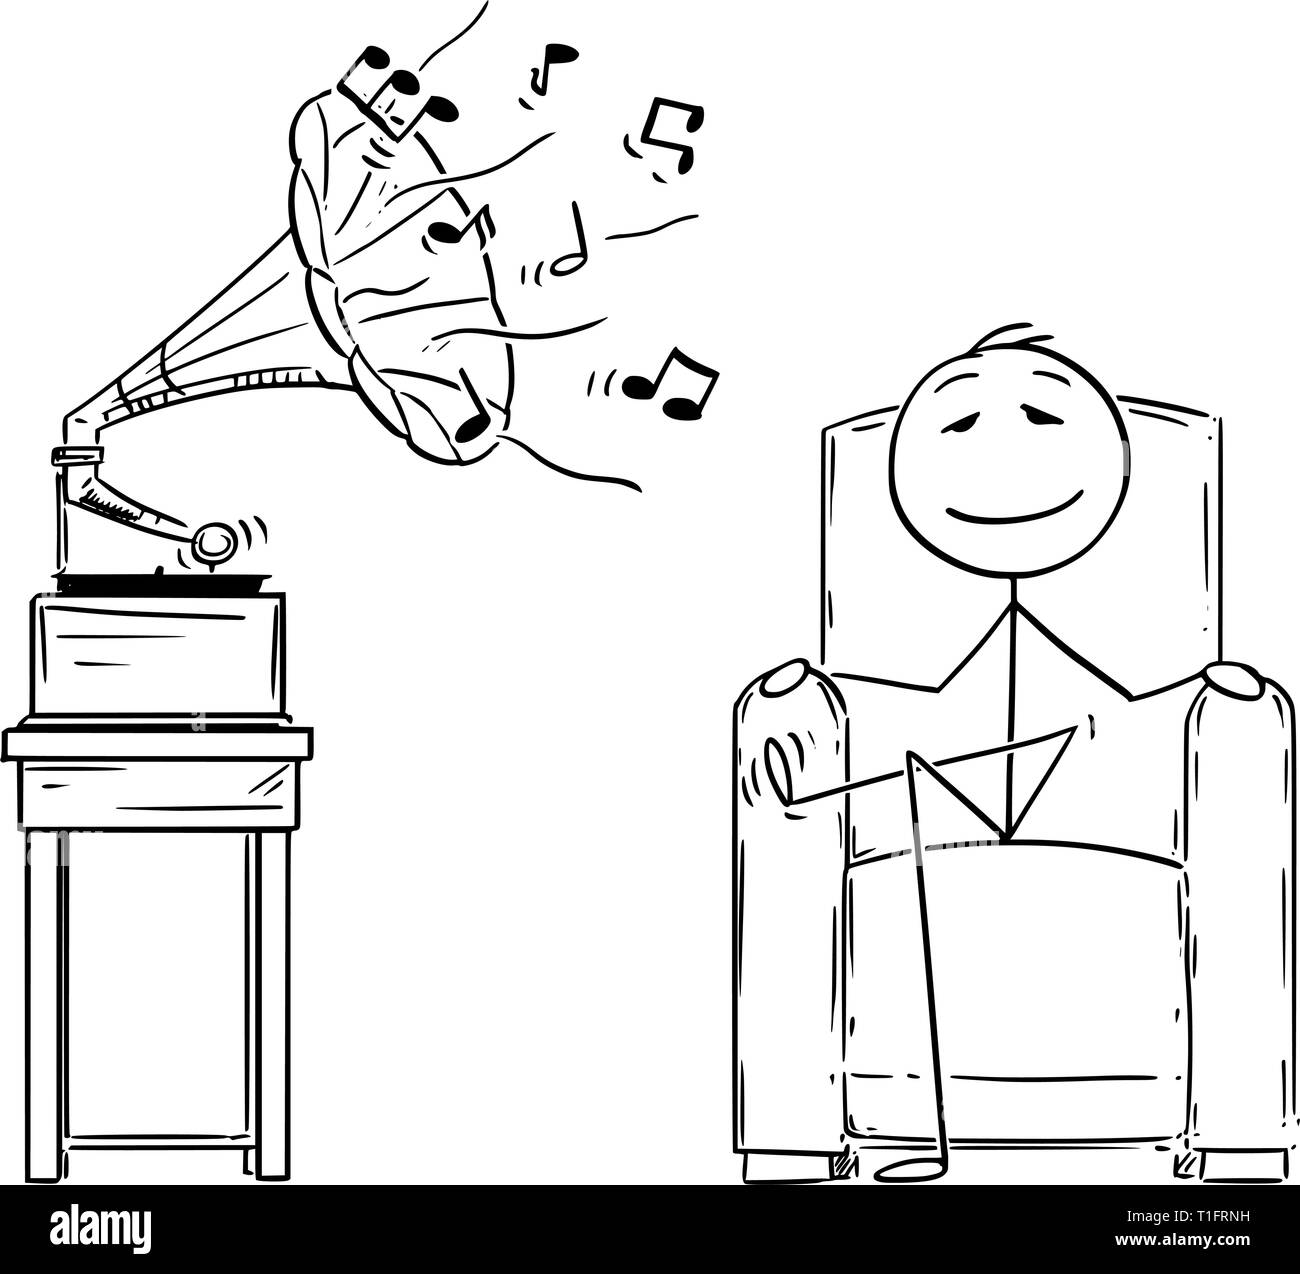 Cartoon stick figure drawing conceptual illustration of man sitting in comfortable armchair and enjoying hearing music from antique gramophone with eyes closed. Stock Vector